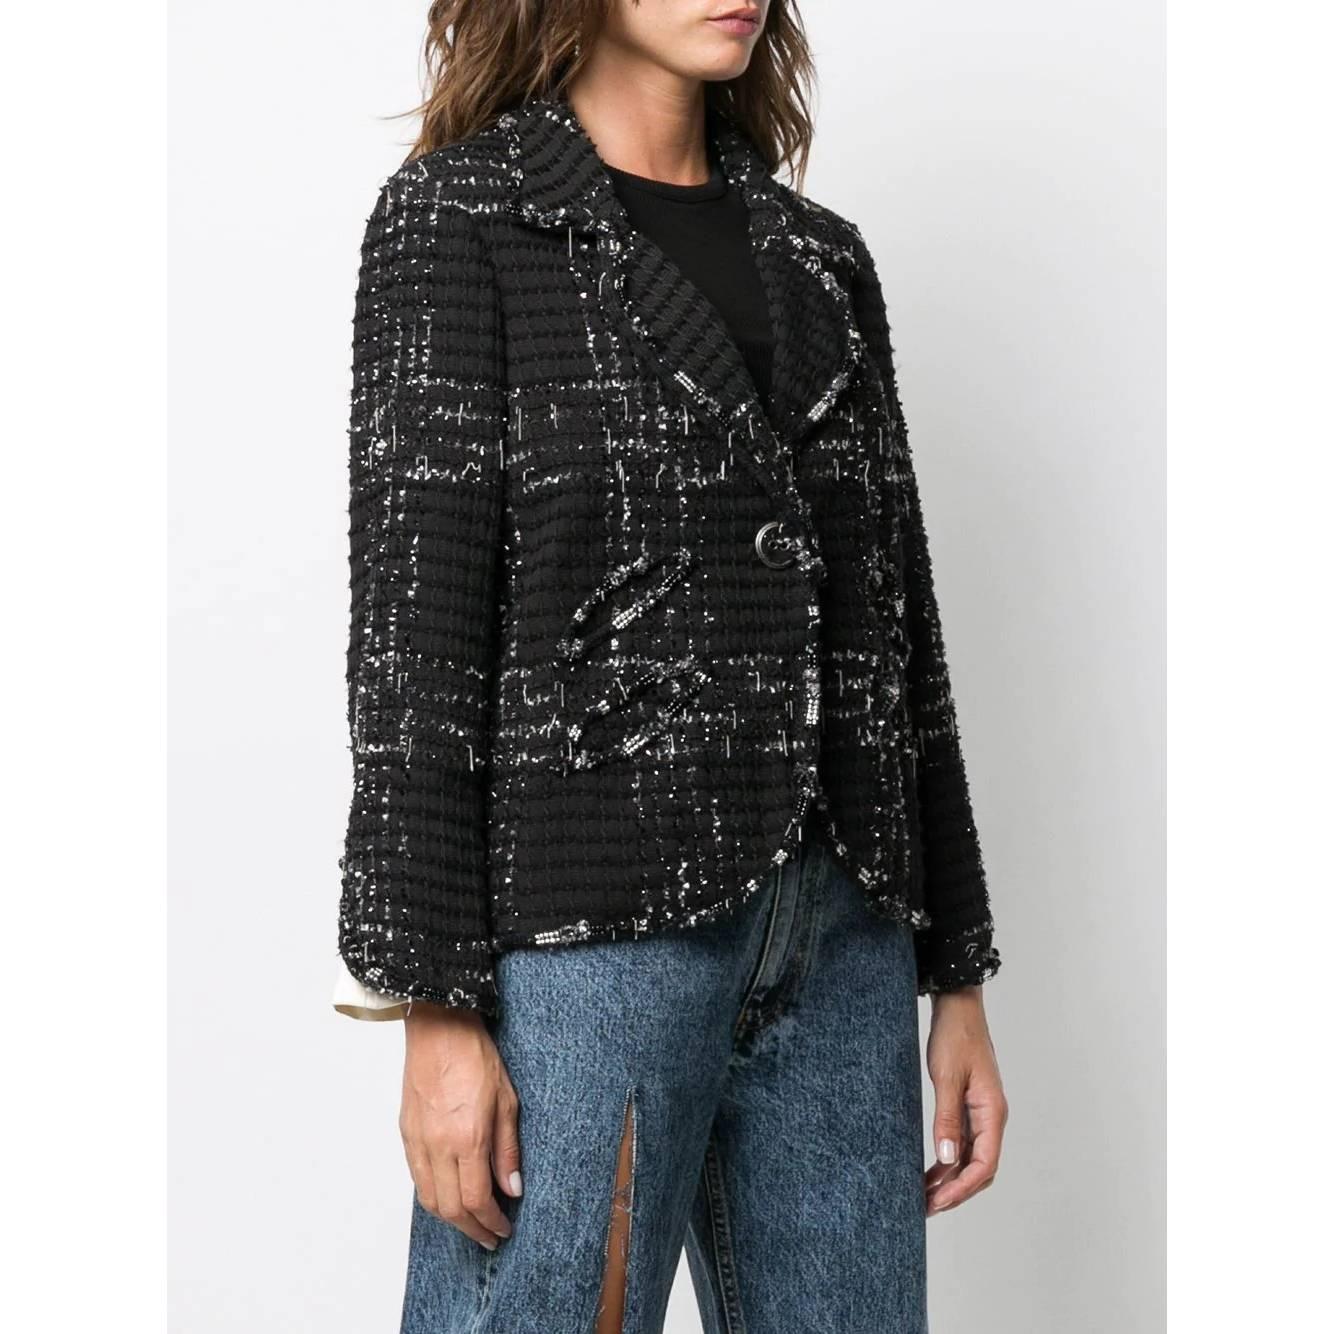 A.N.G.E.L.O. Vintage - ITALY
Chanel black wool blend jacket with silver threads, intertwined chains and decorative beads. Classic lapel collar, front button closure and rounded edges. Long sleeves with slit and double cuff on the bottom.

Years: